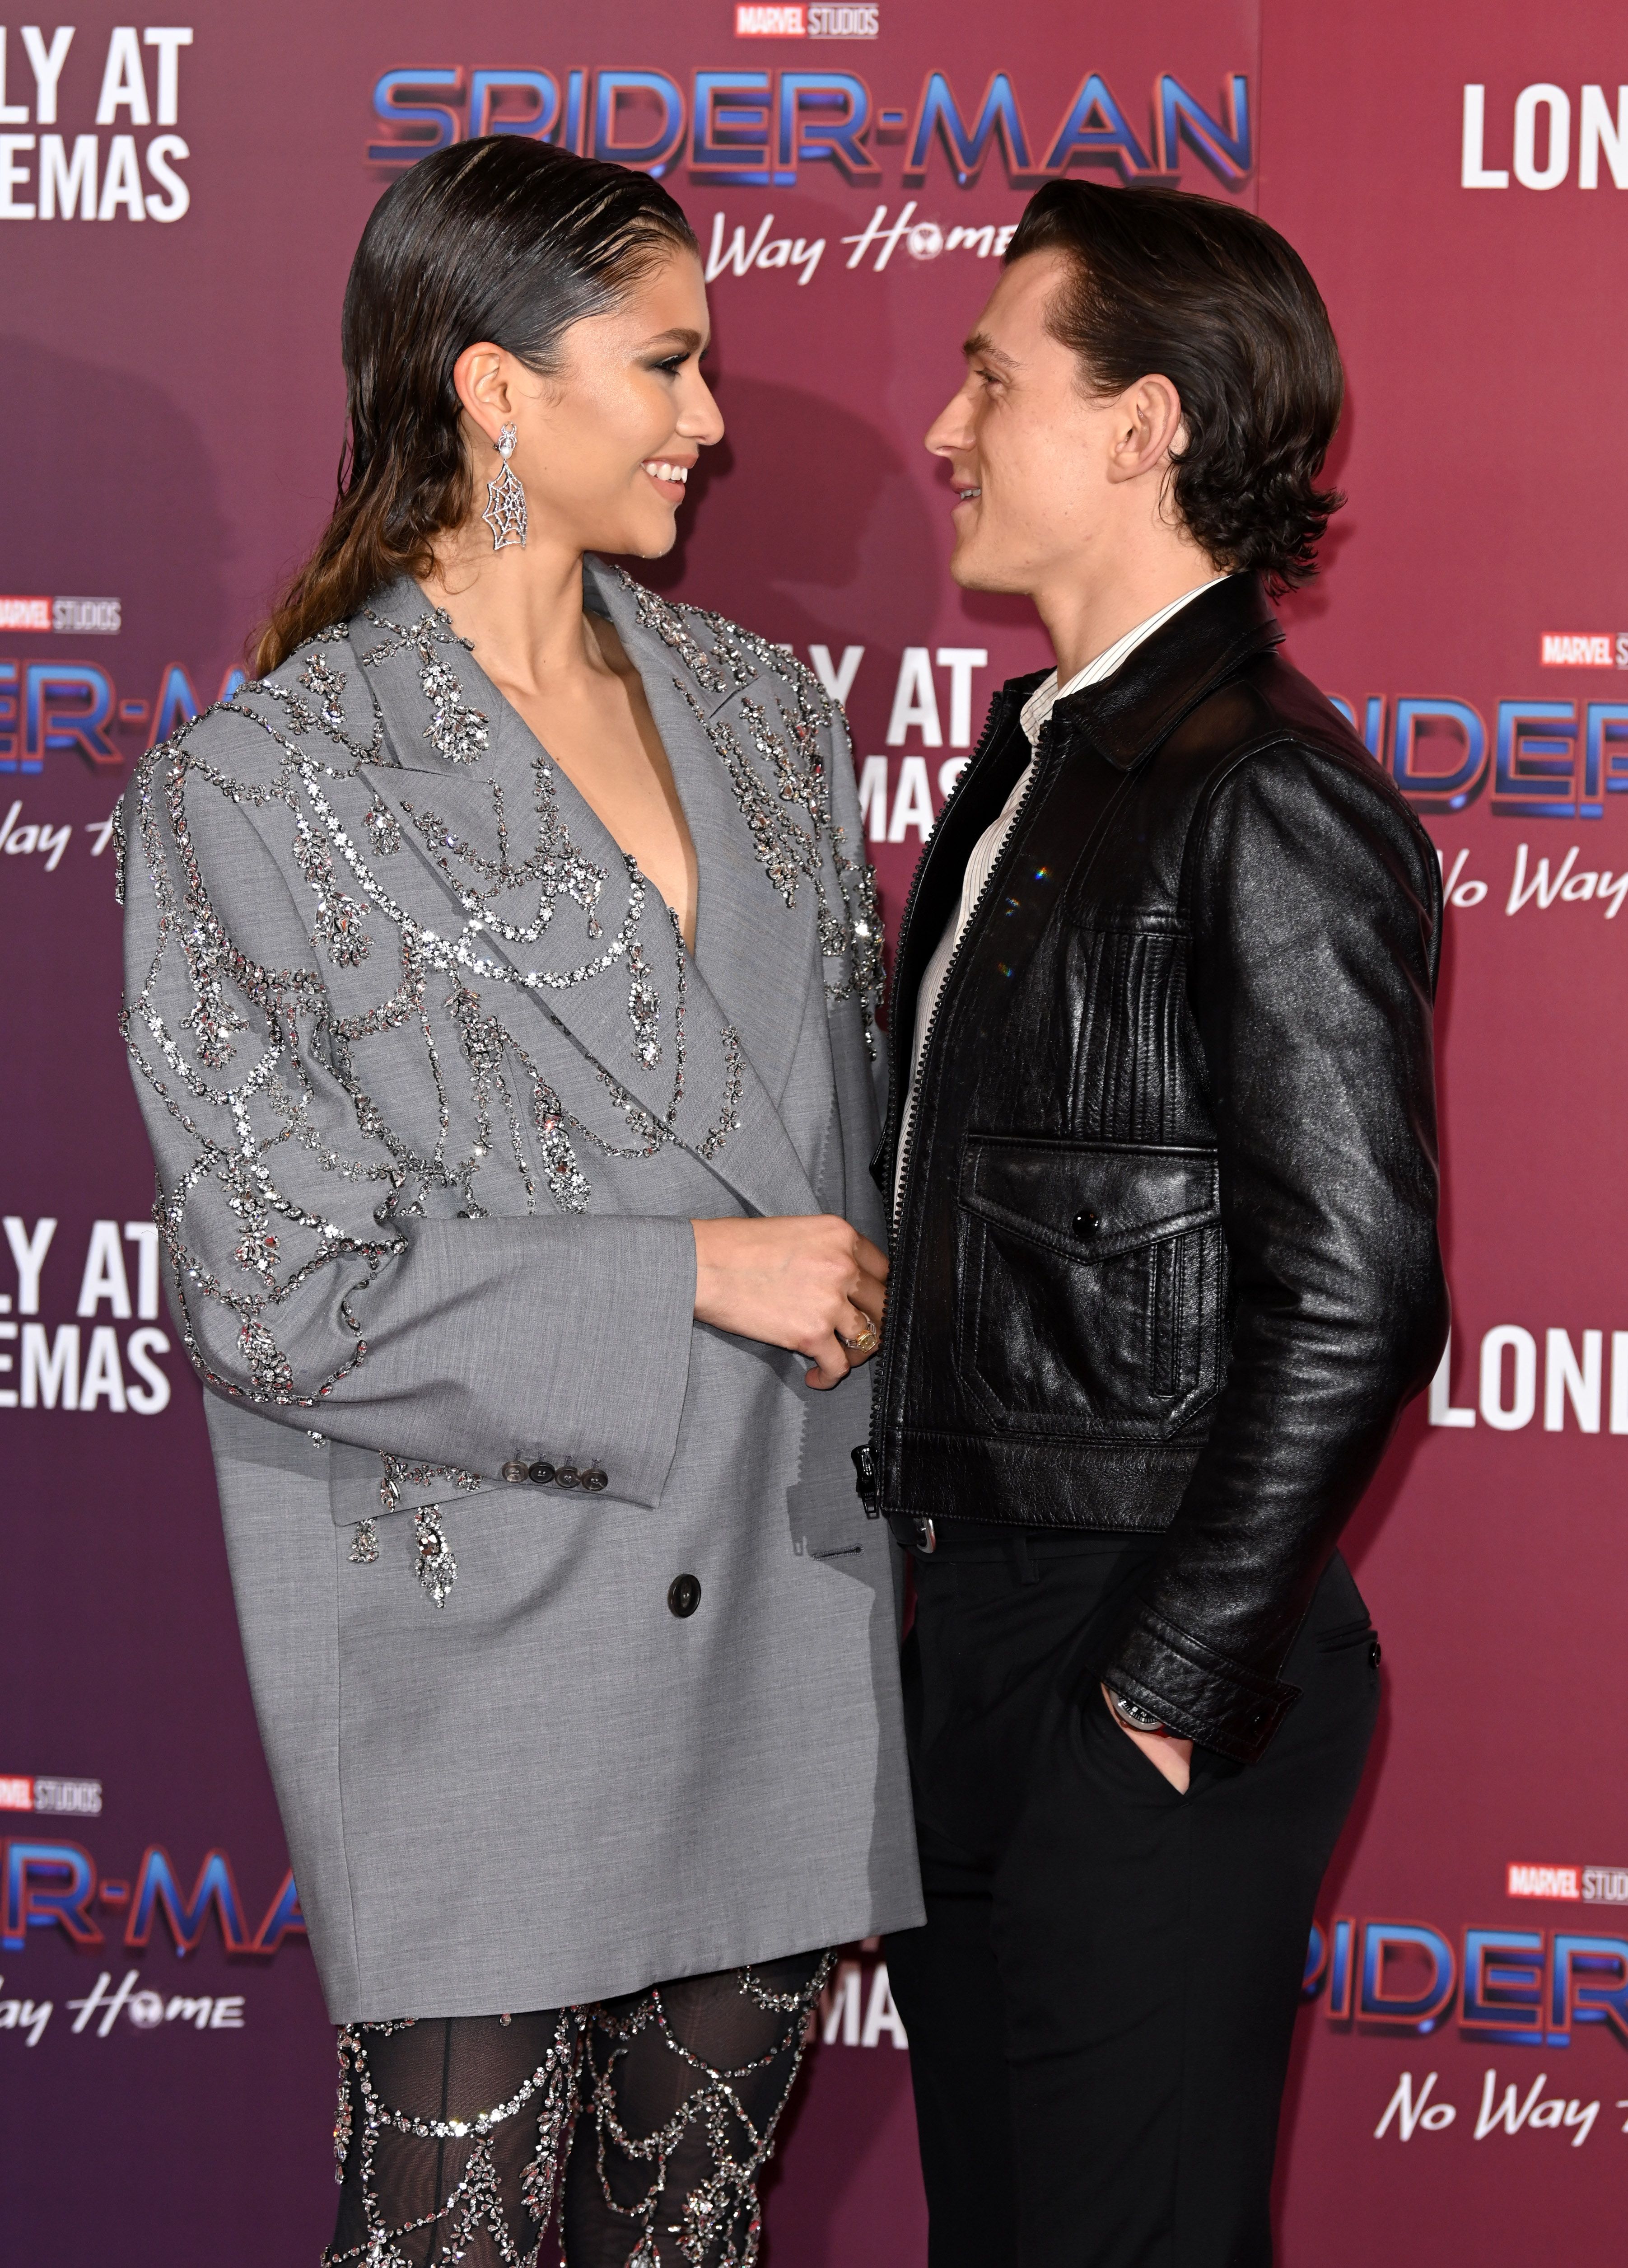 Zendaya and Tom Holland during a photocall for "Spiderman: No Way Home" at The Old Sessions House on December 05, 2021 in London, England. | Source: Getty Images